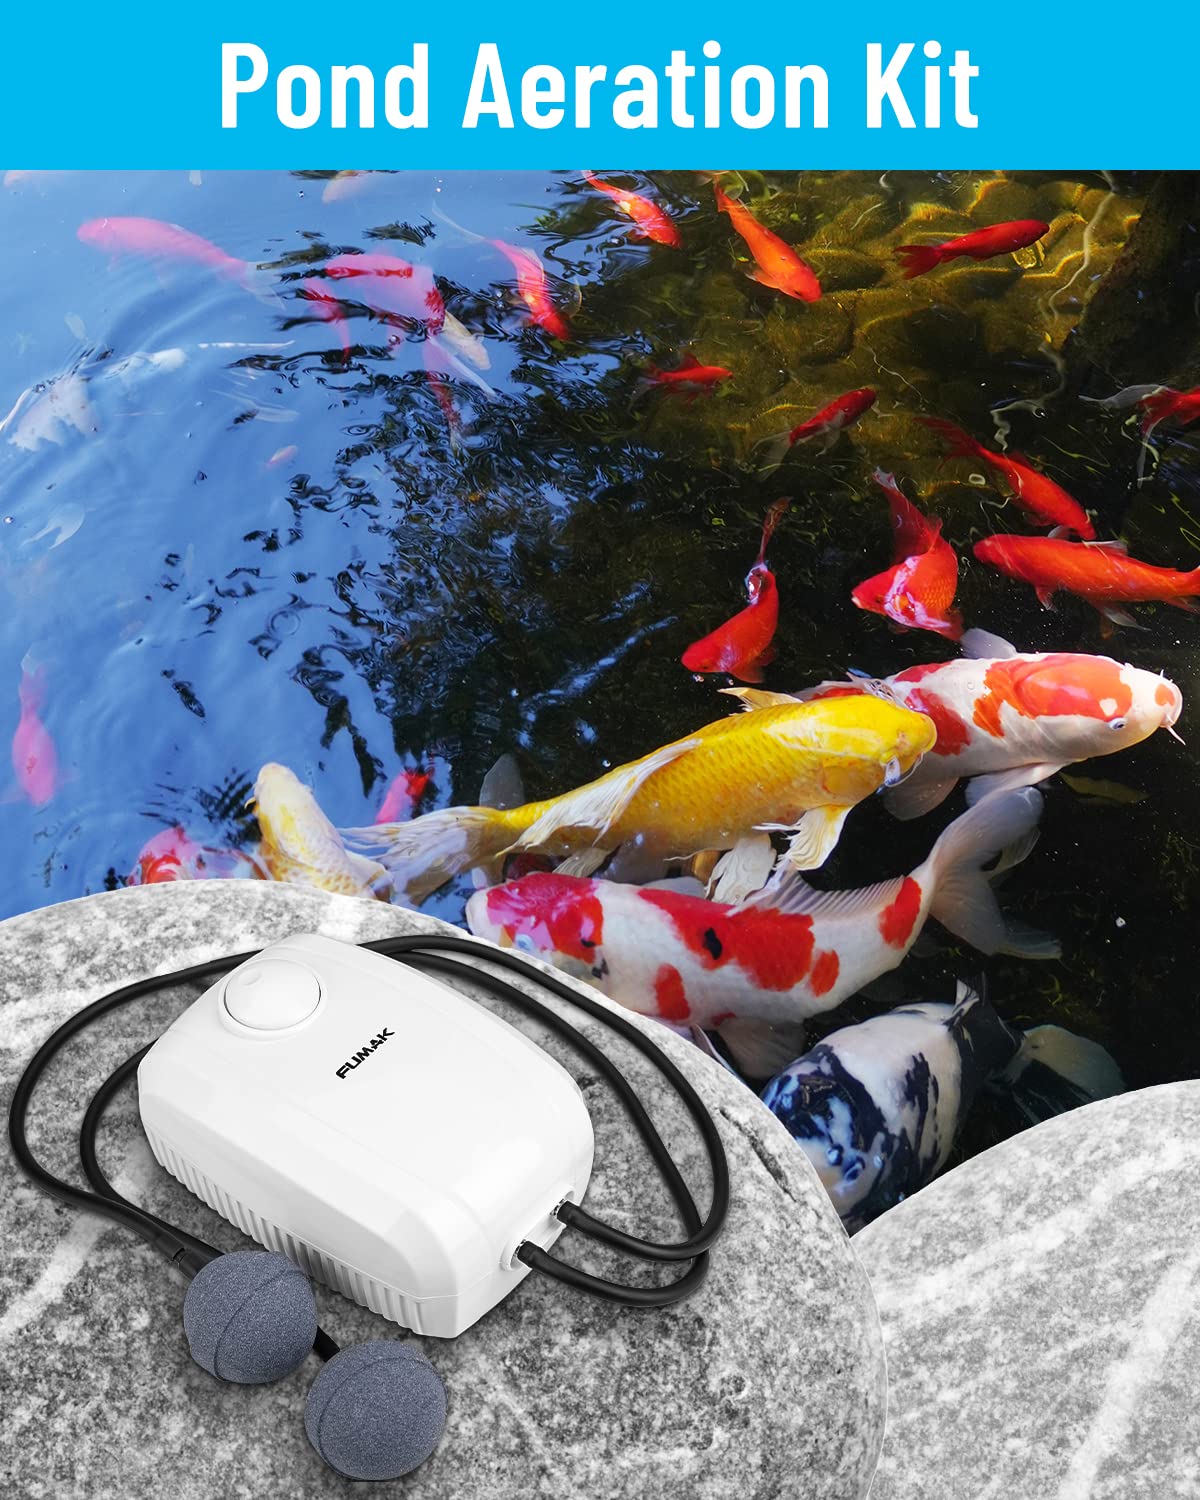 FUMAK Pond Aeration Kit – Koi Pond Aerator Pond Air Pump Kit for Pond up to 2000 Gallons Pond Deicer All-in-One Pond Aeration System with Double Outlets Check Valves Airline Tubing Air Stones